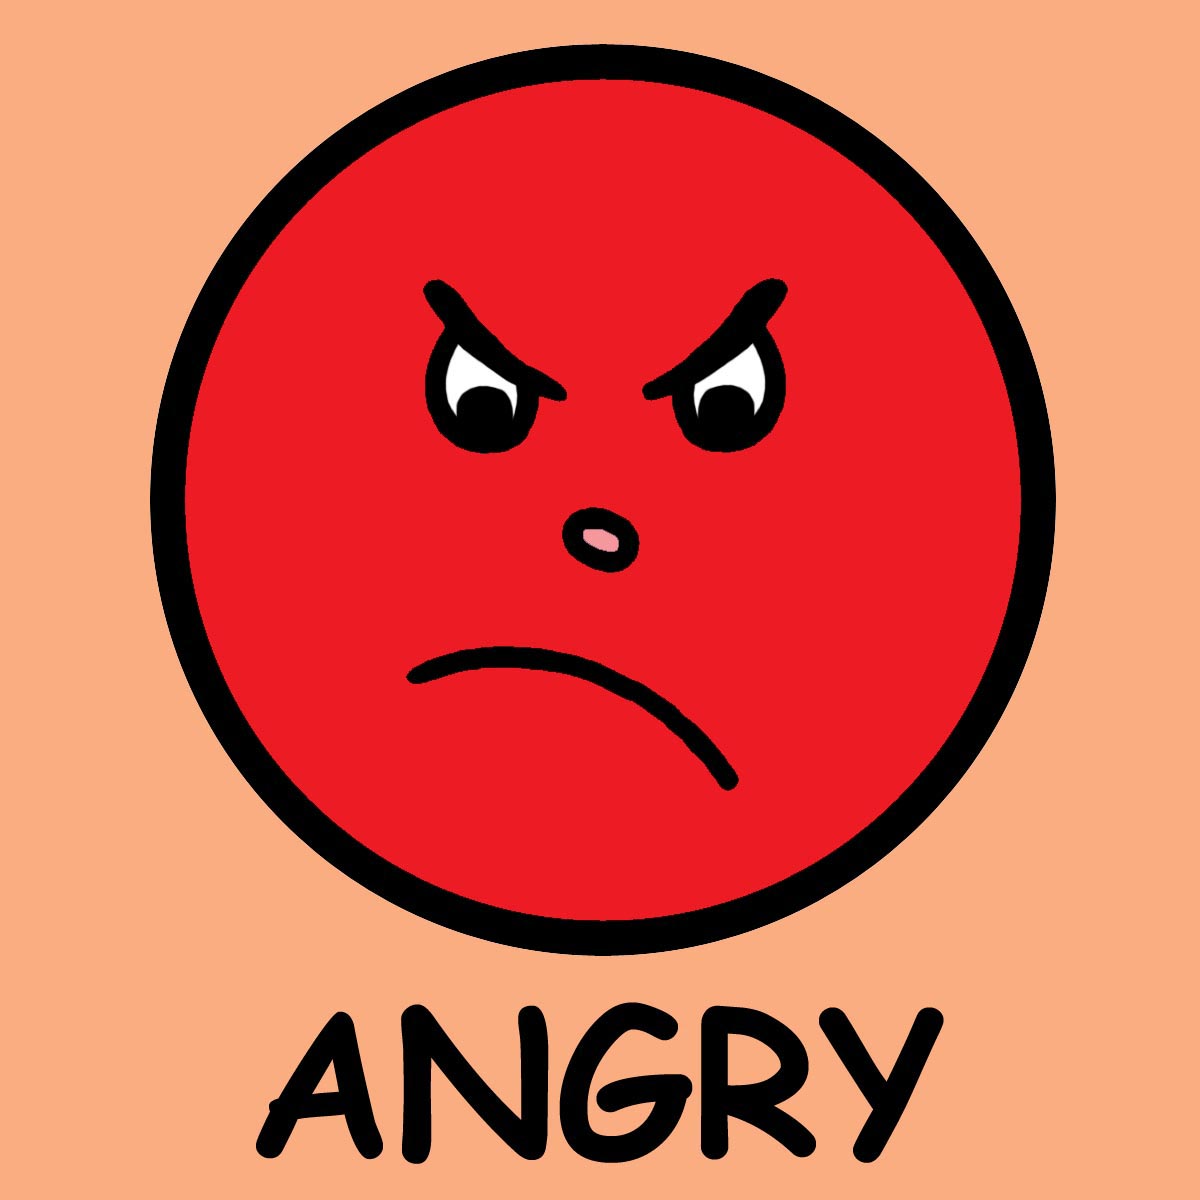 Angry Face Clipart - ClipArt Best